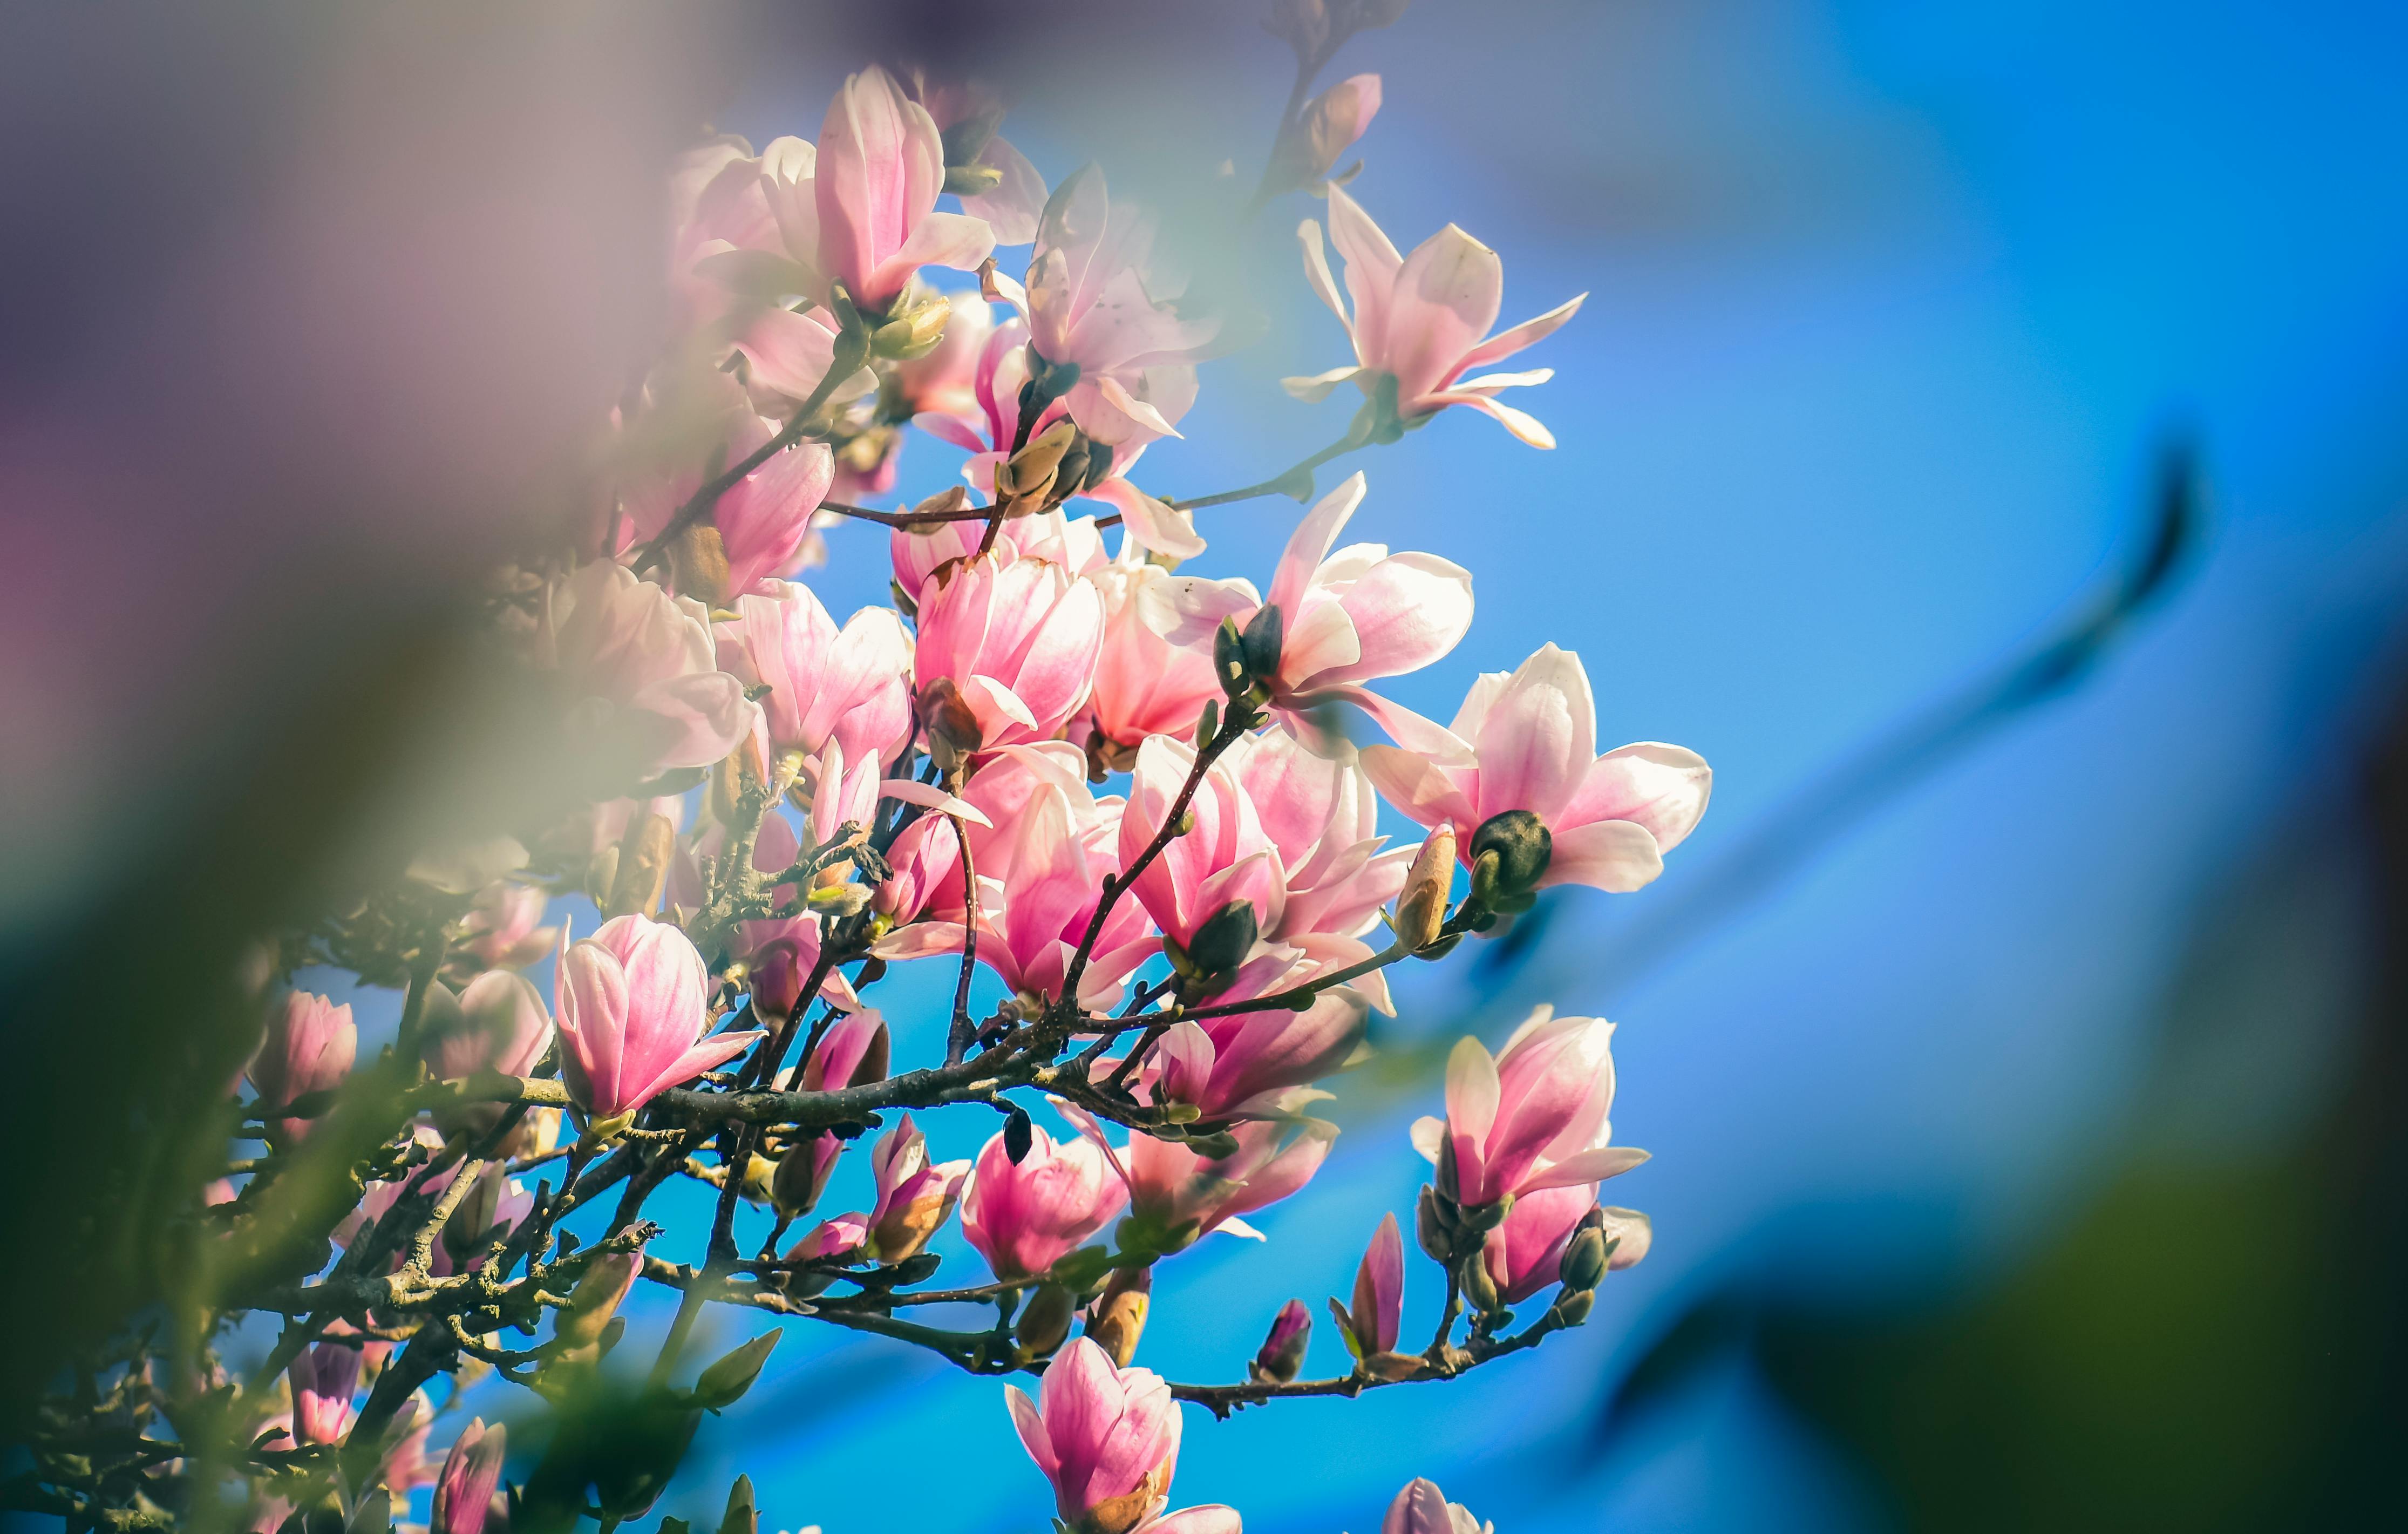 Pink and White Flowers in Tilt Shift Lens · Free Stock Photo